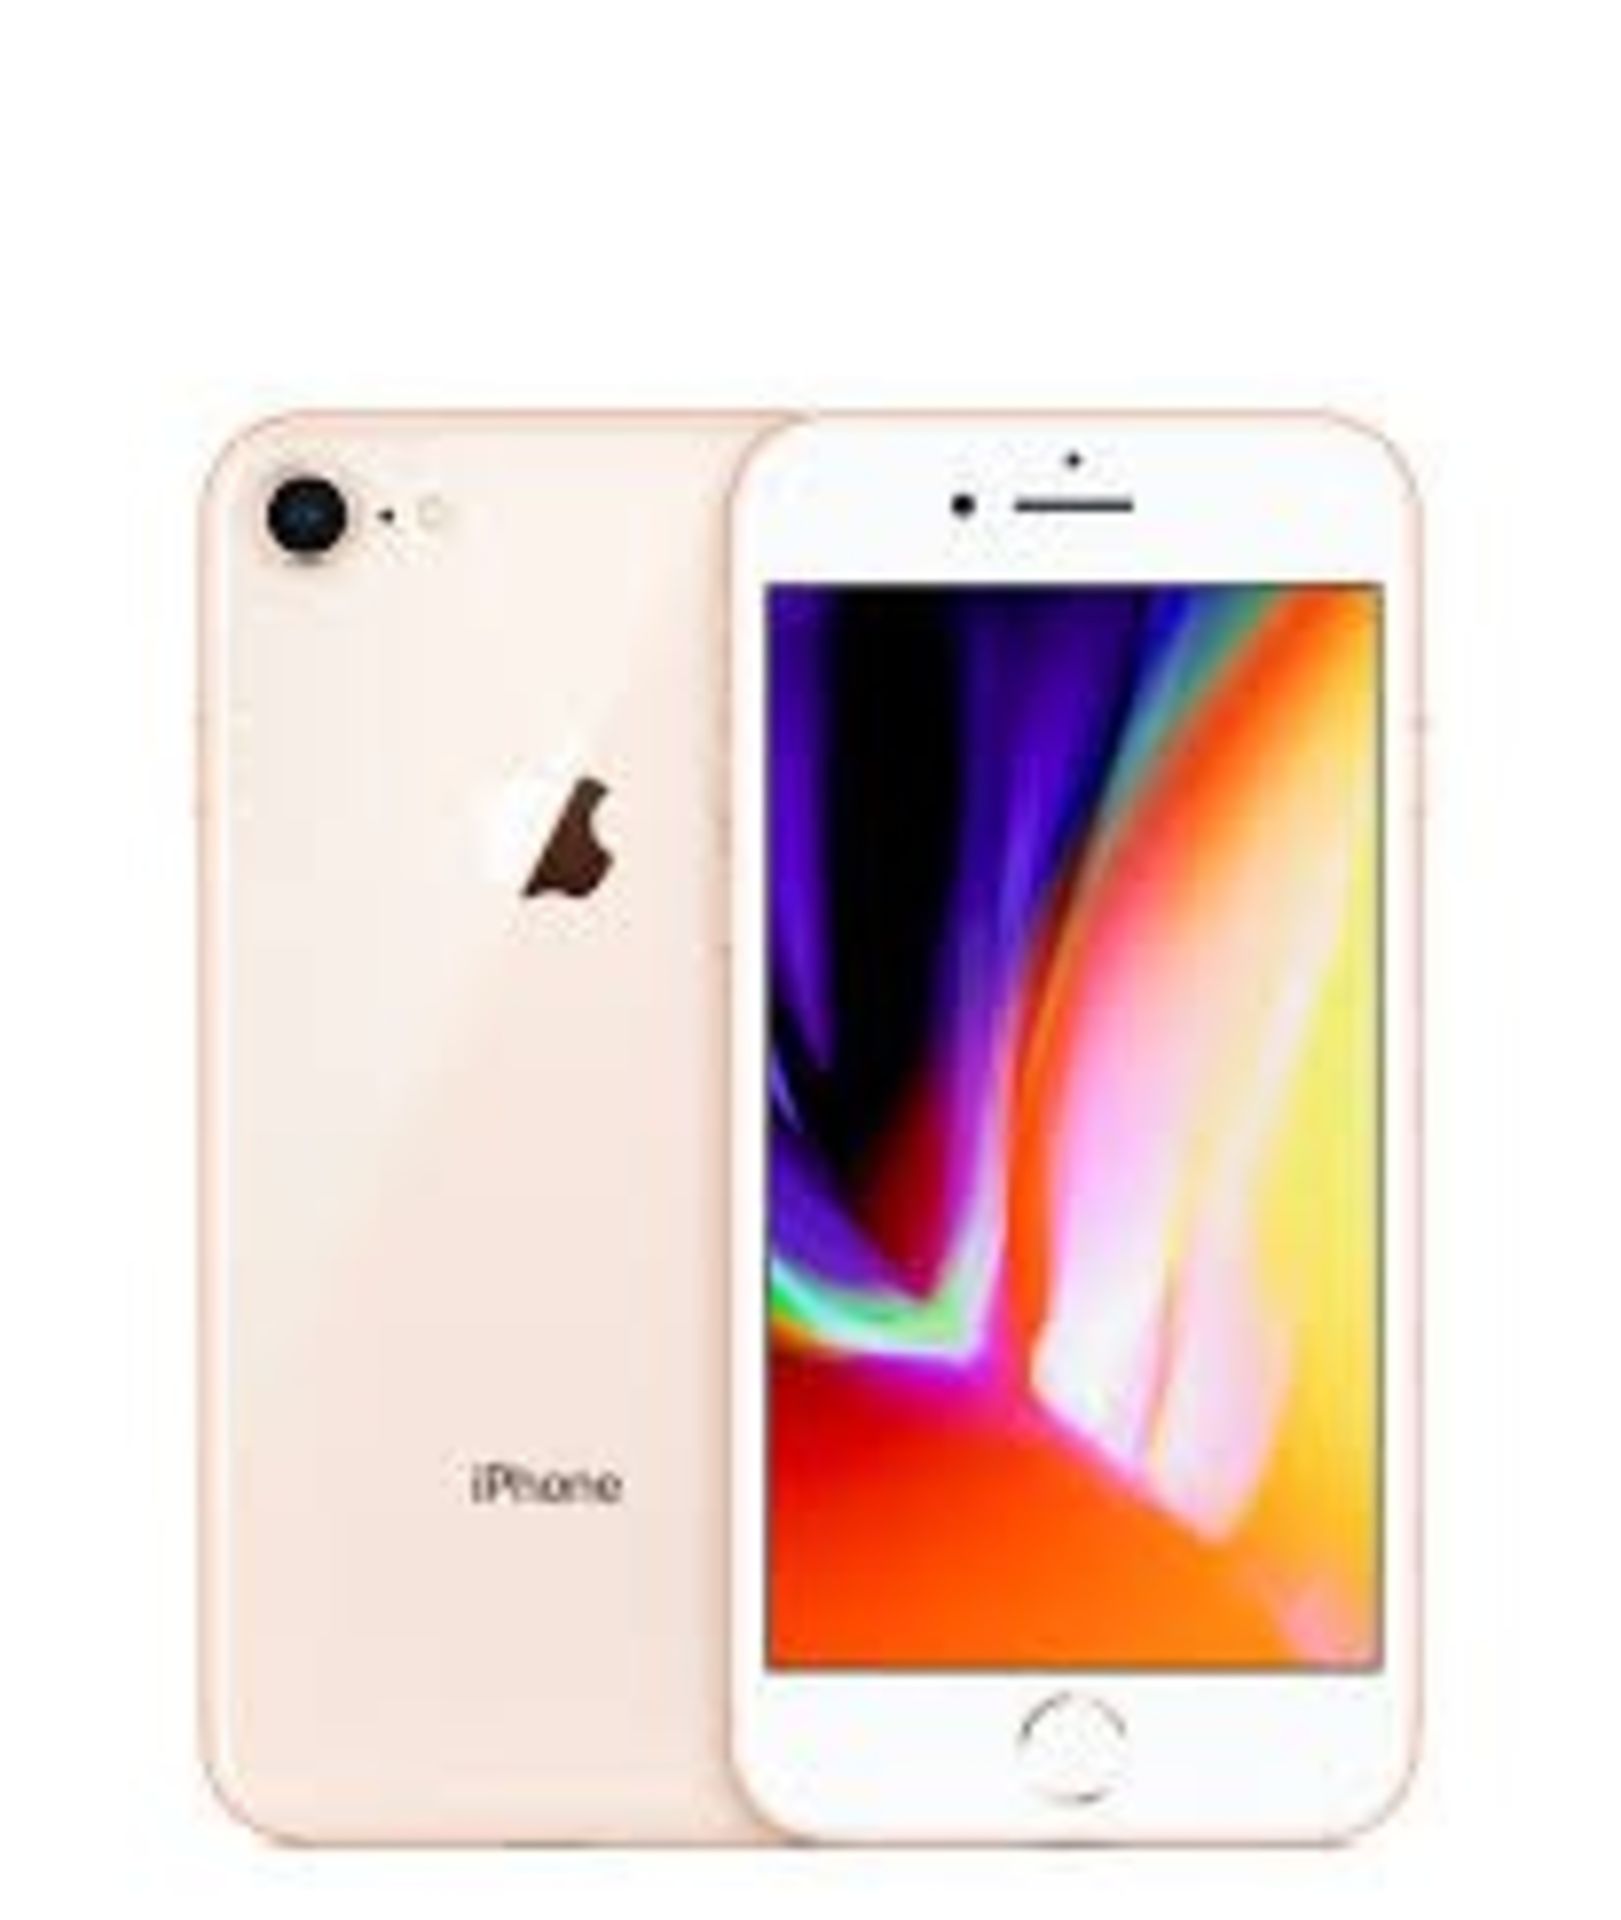 Apple iPhone 8 64GB Gold Grade A - Perfect Working Condition RRP £479 (Fully refurbished and